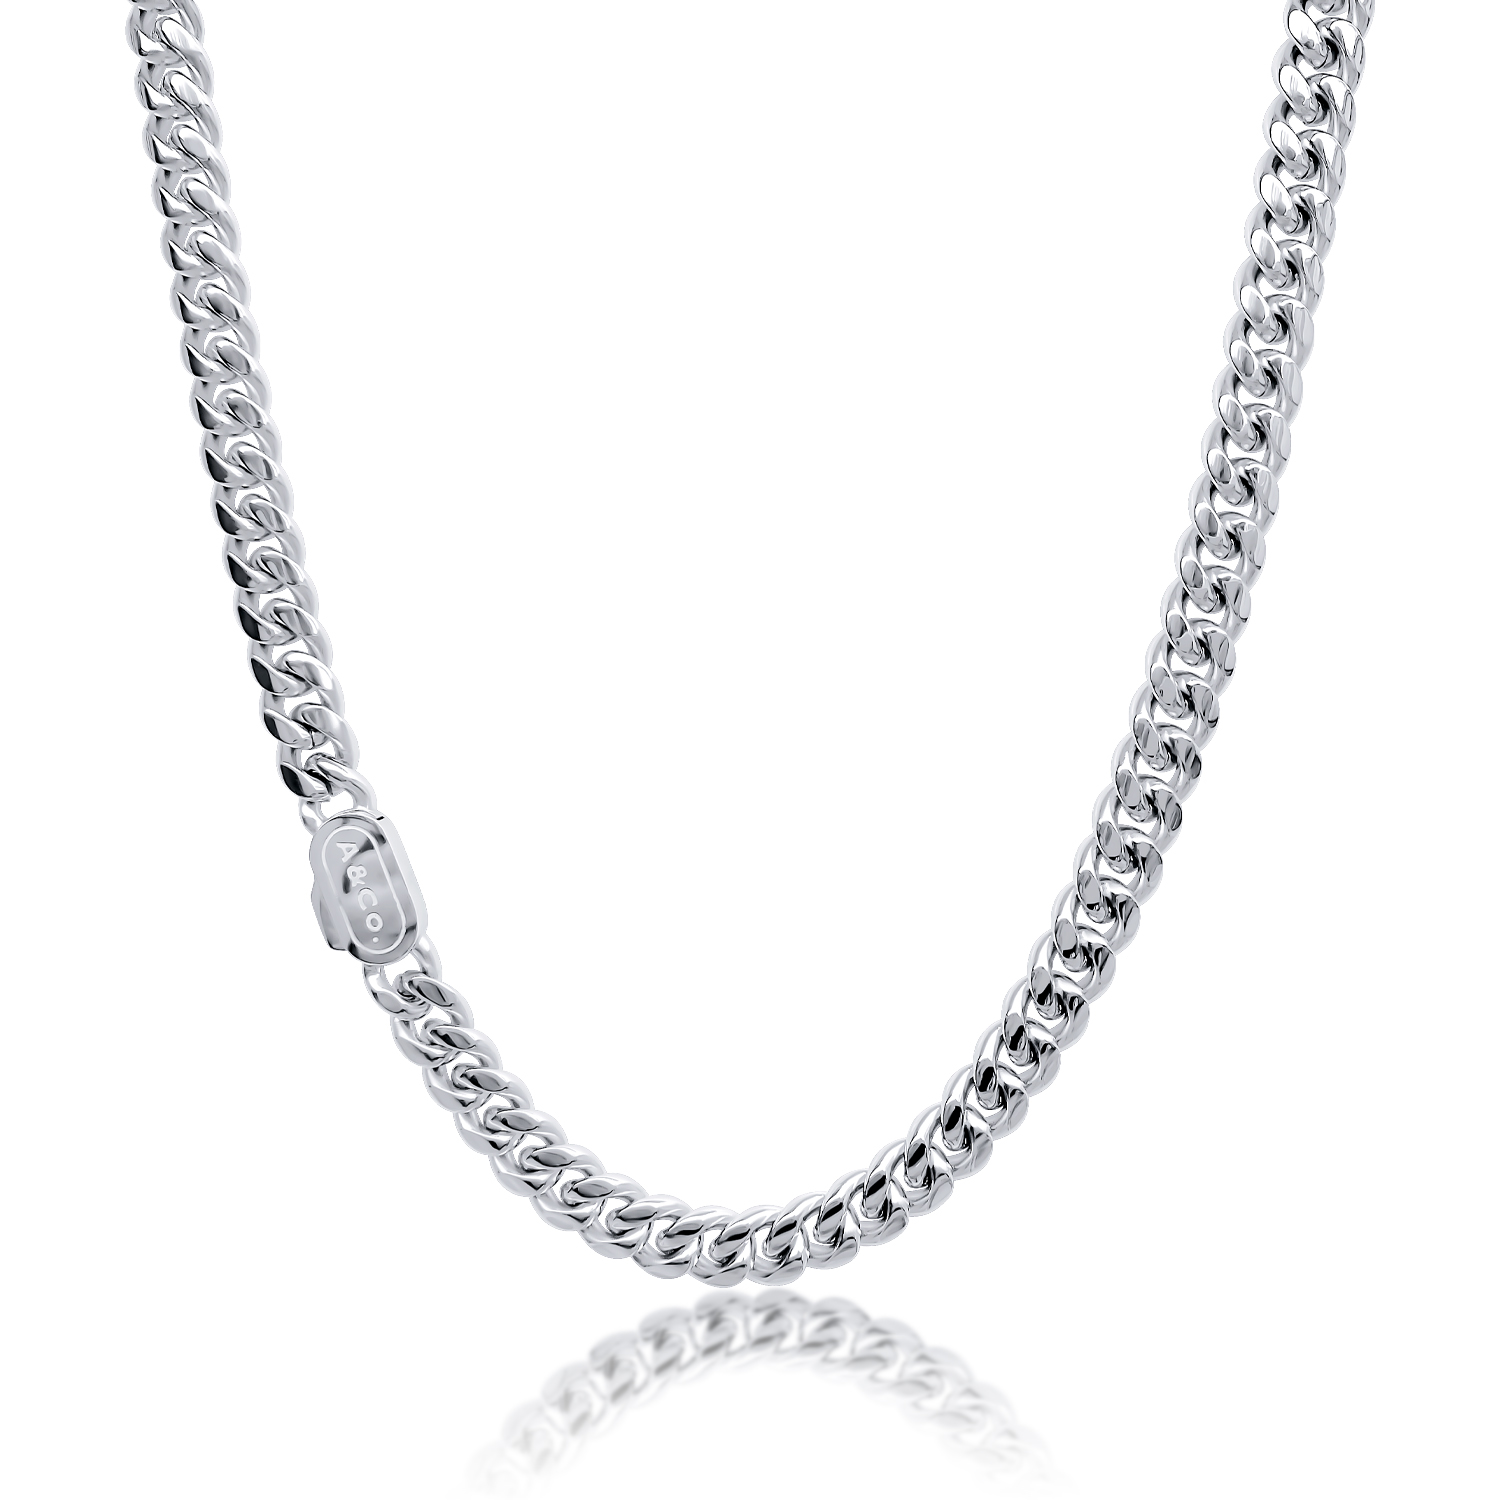 Alfred & Co. London Men's Curb Chain Necklace